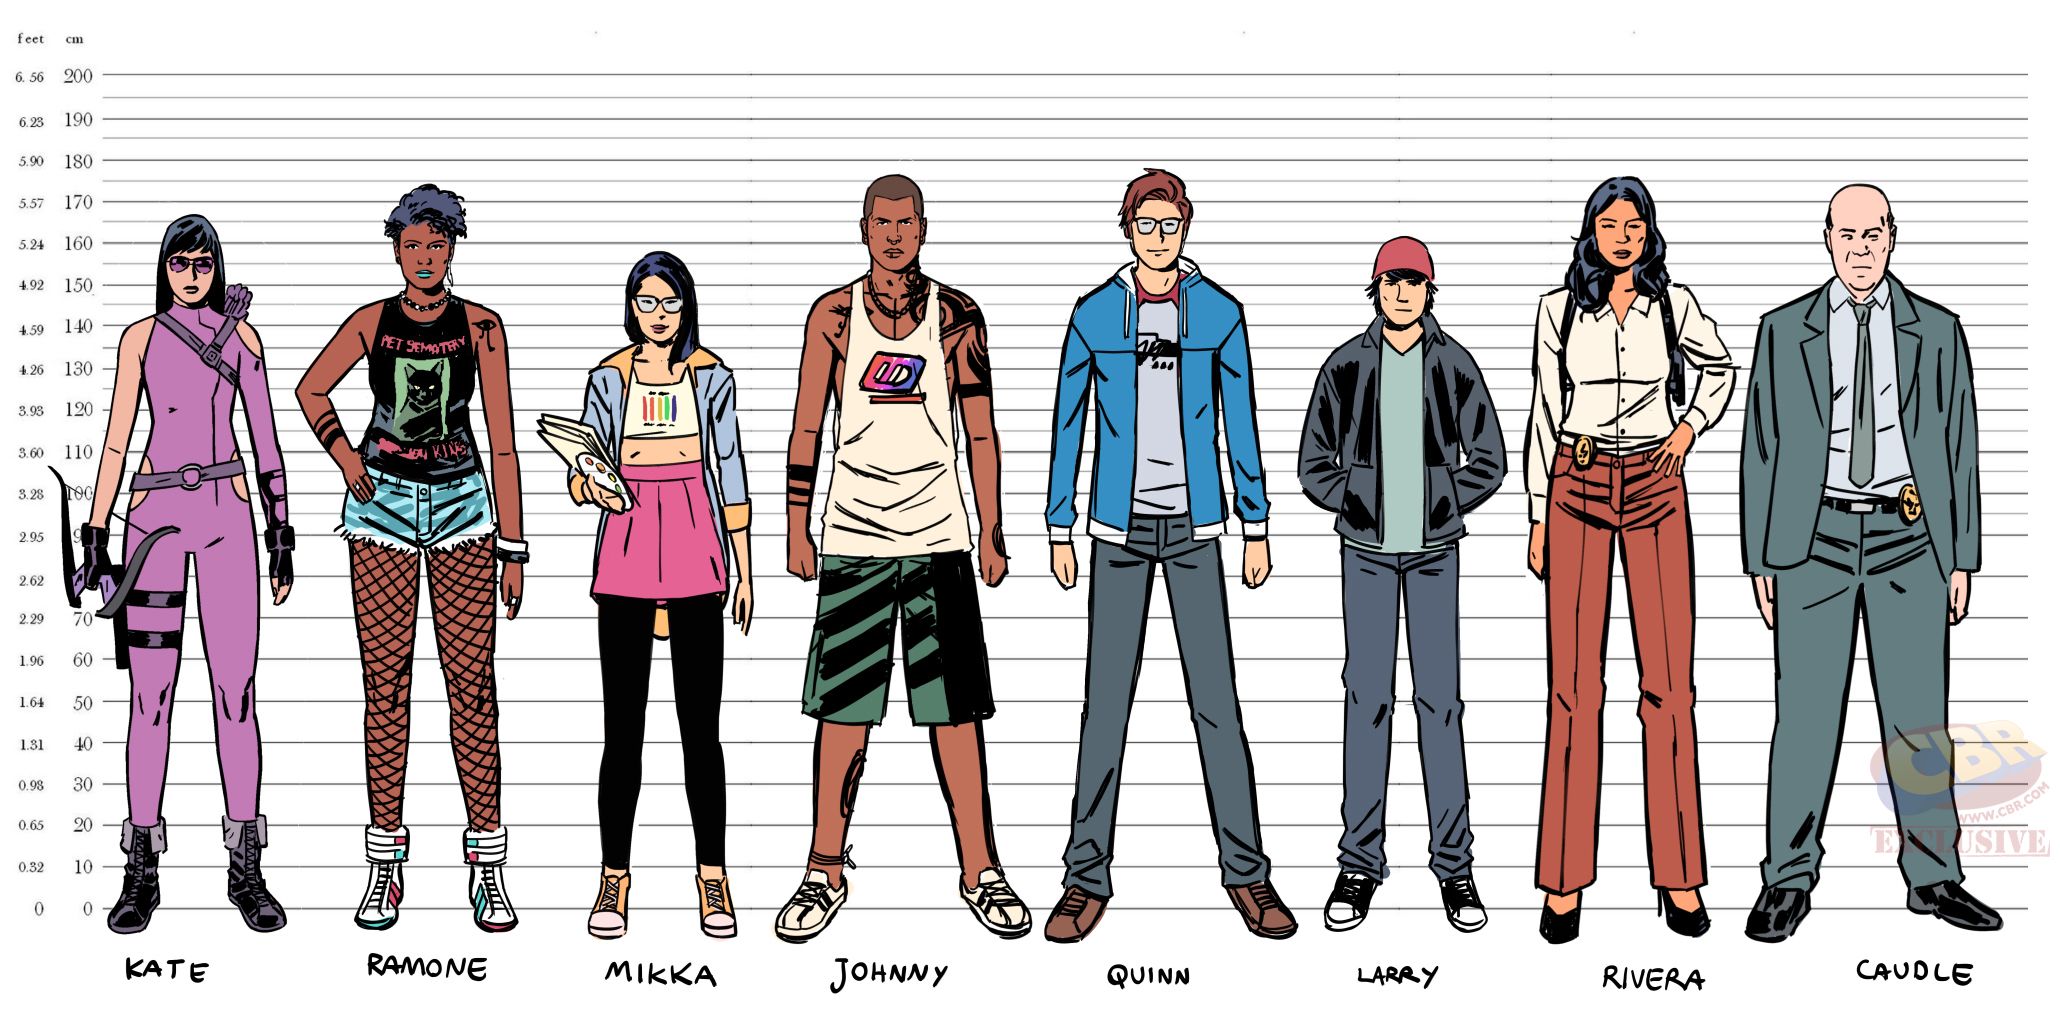 The Hawkeye cast of characters, as illustrated by Leonardo Romero.